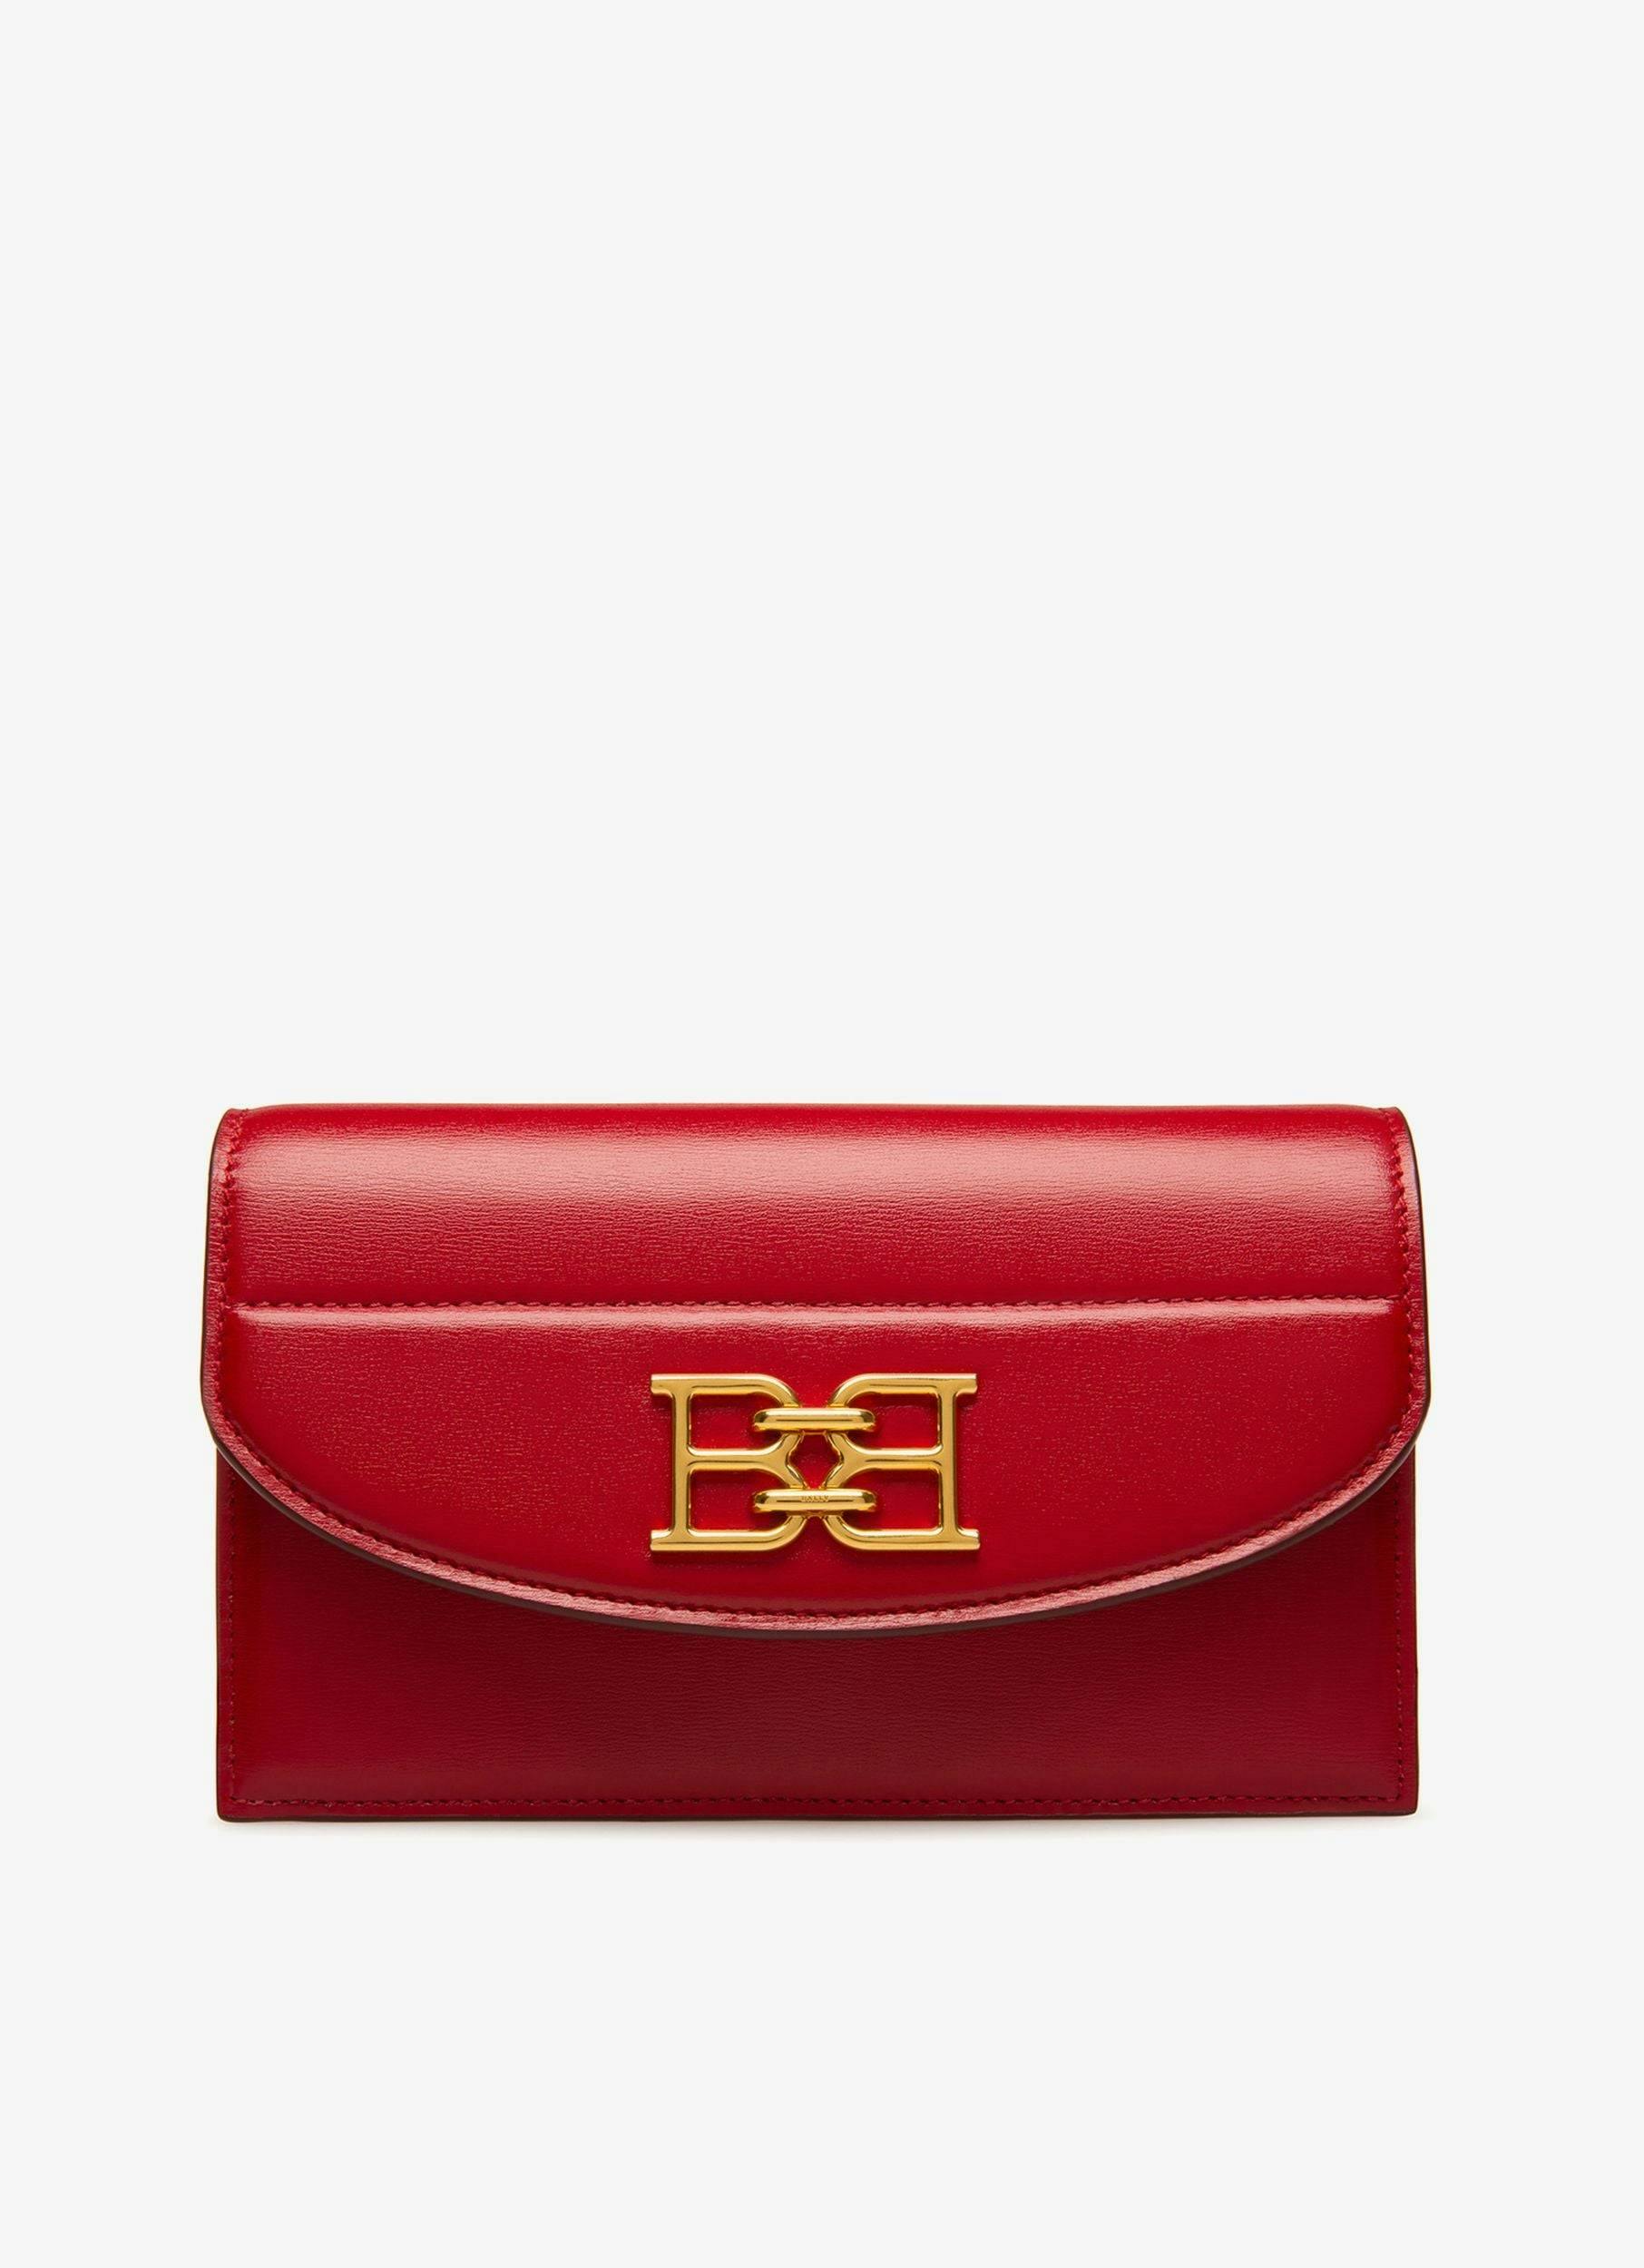 B CHAIN Leather Phone Wallet In Red - Women's - Bally - 01